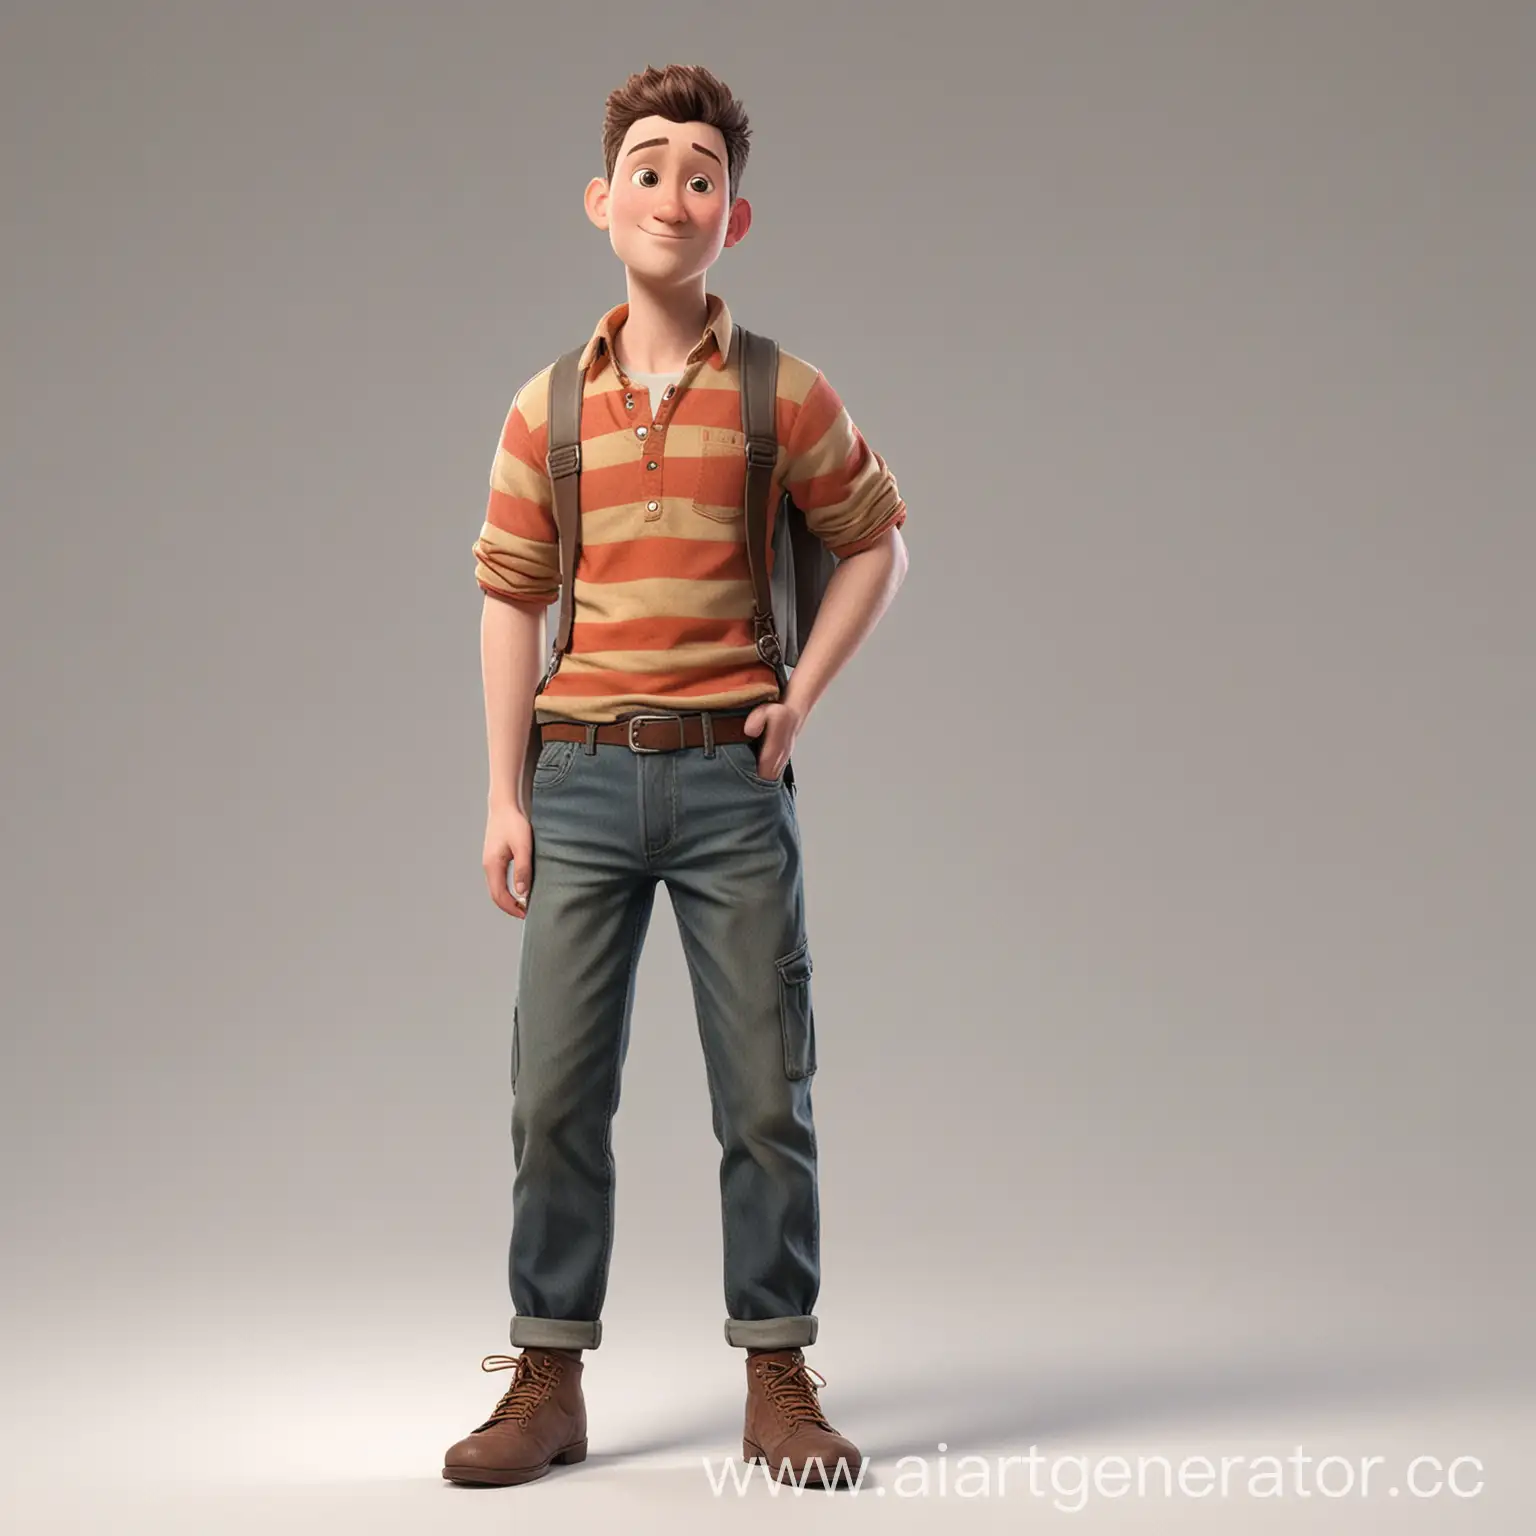 Cartoon-Male-Character-with-Short-Haircut-Standing-Up